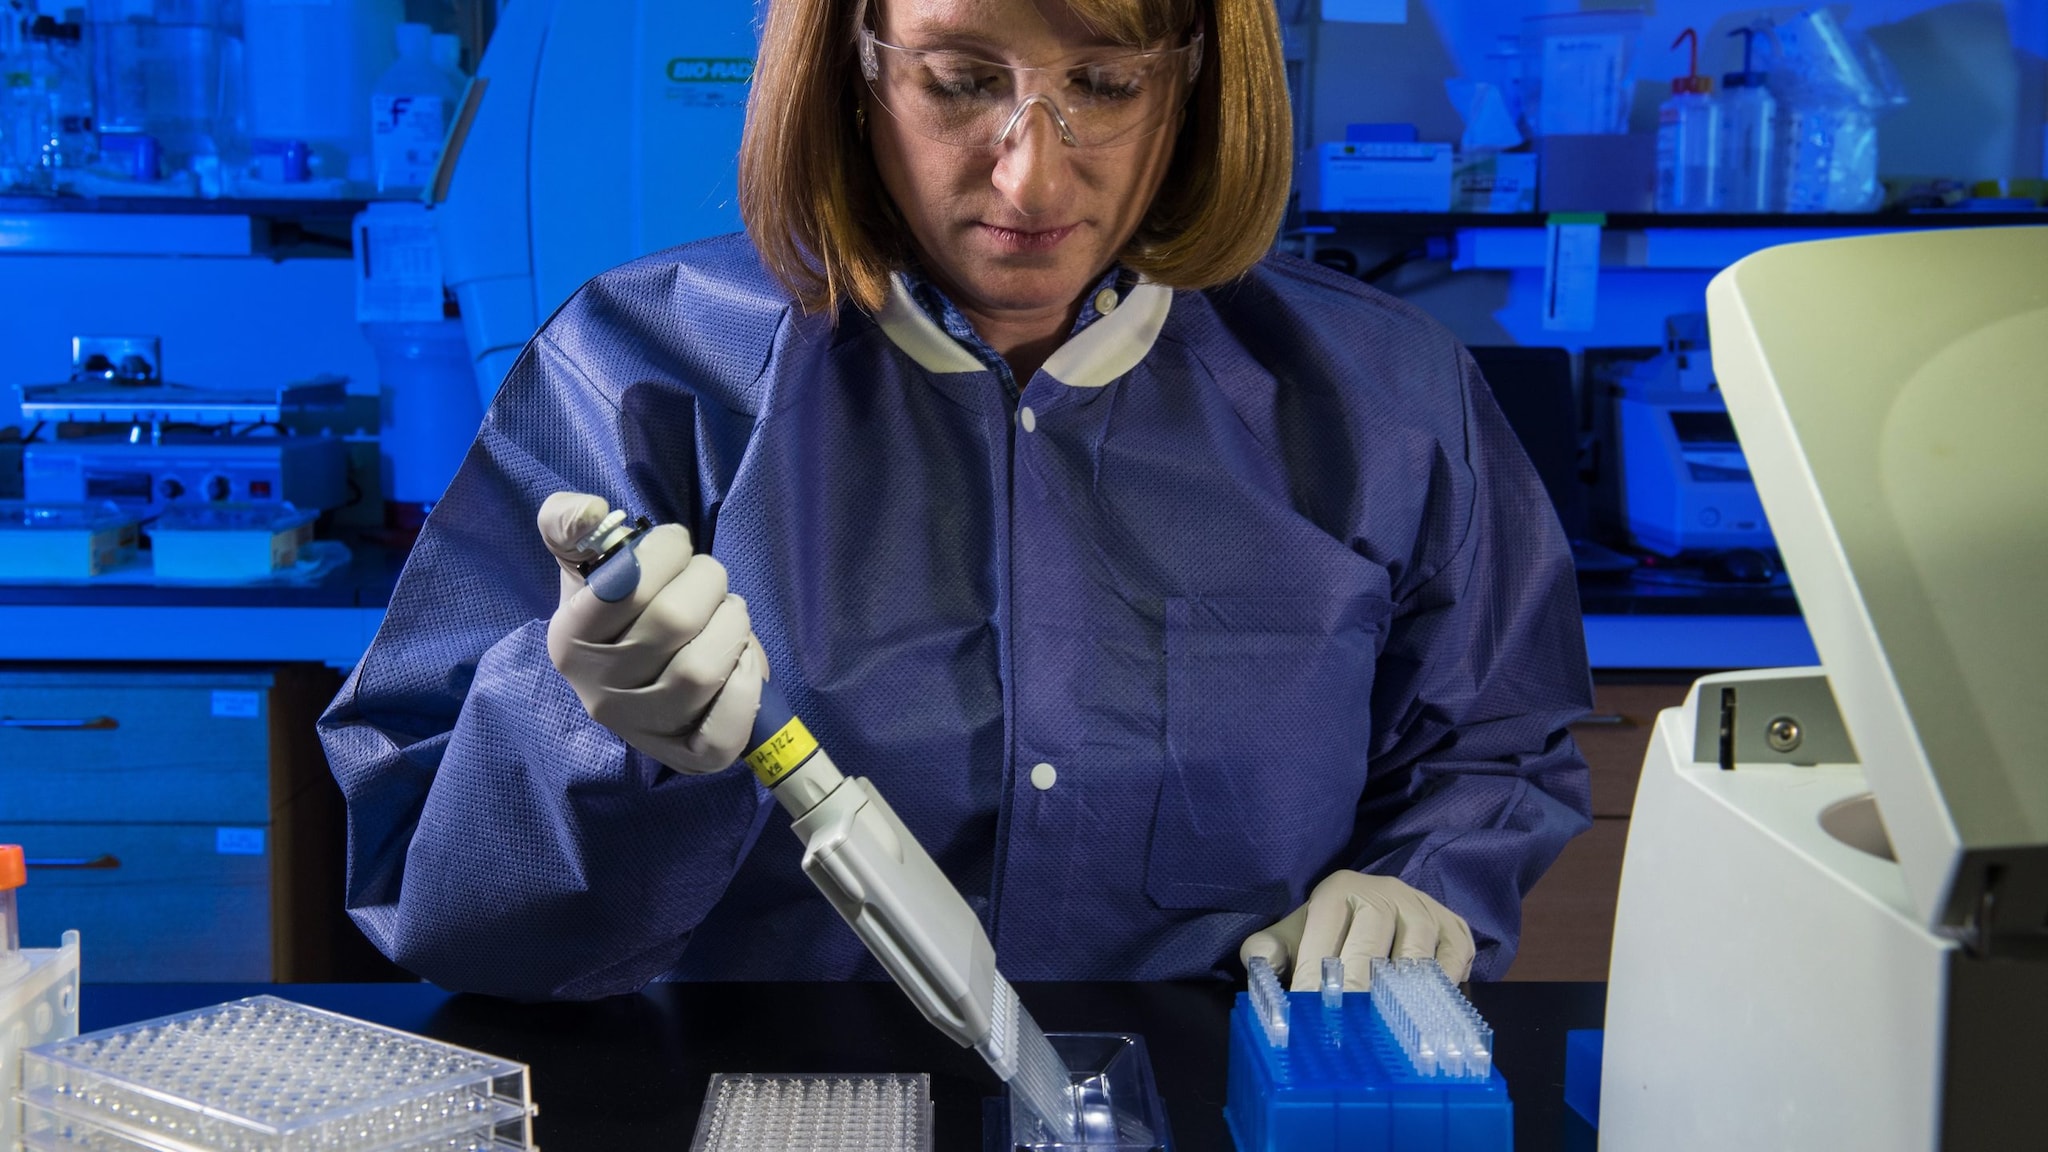 Lab worker holding a pipette running a test